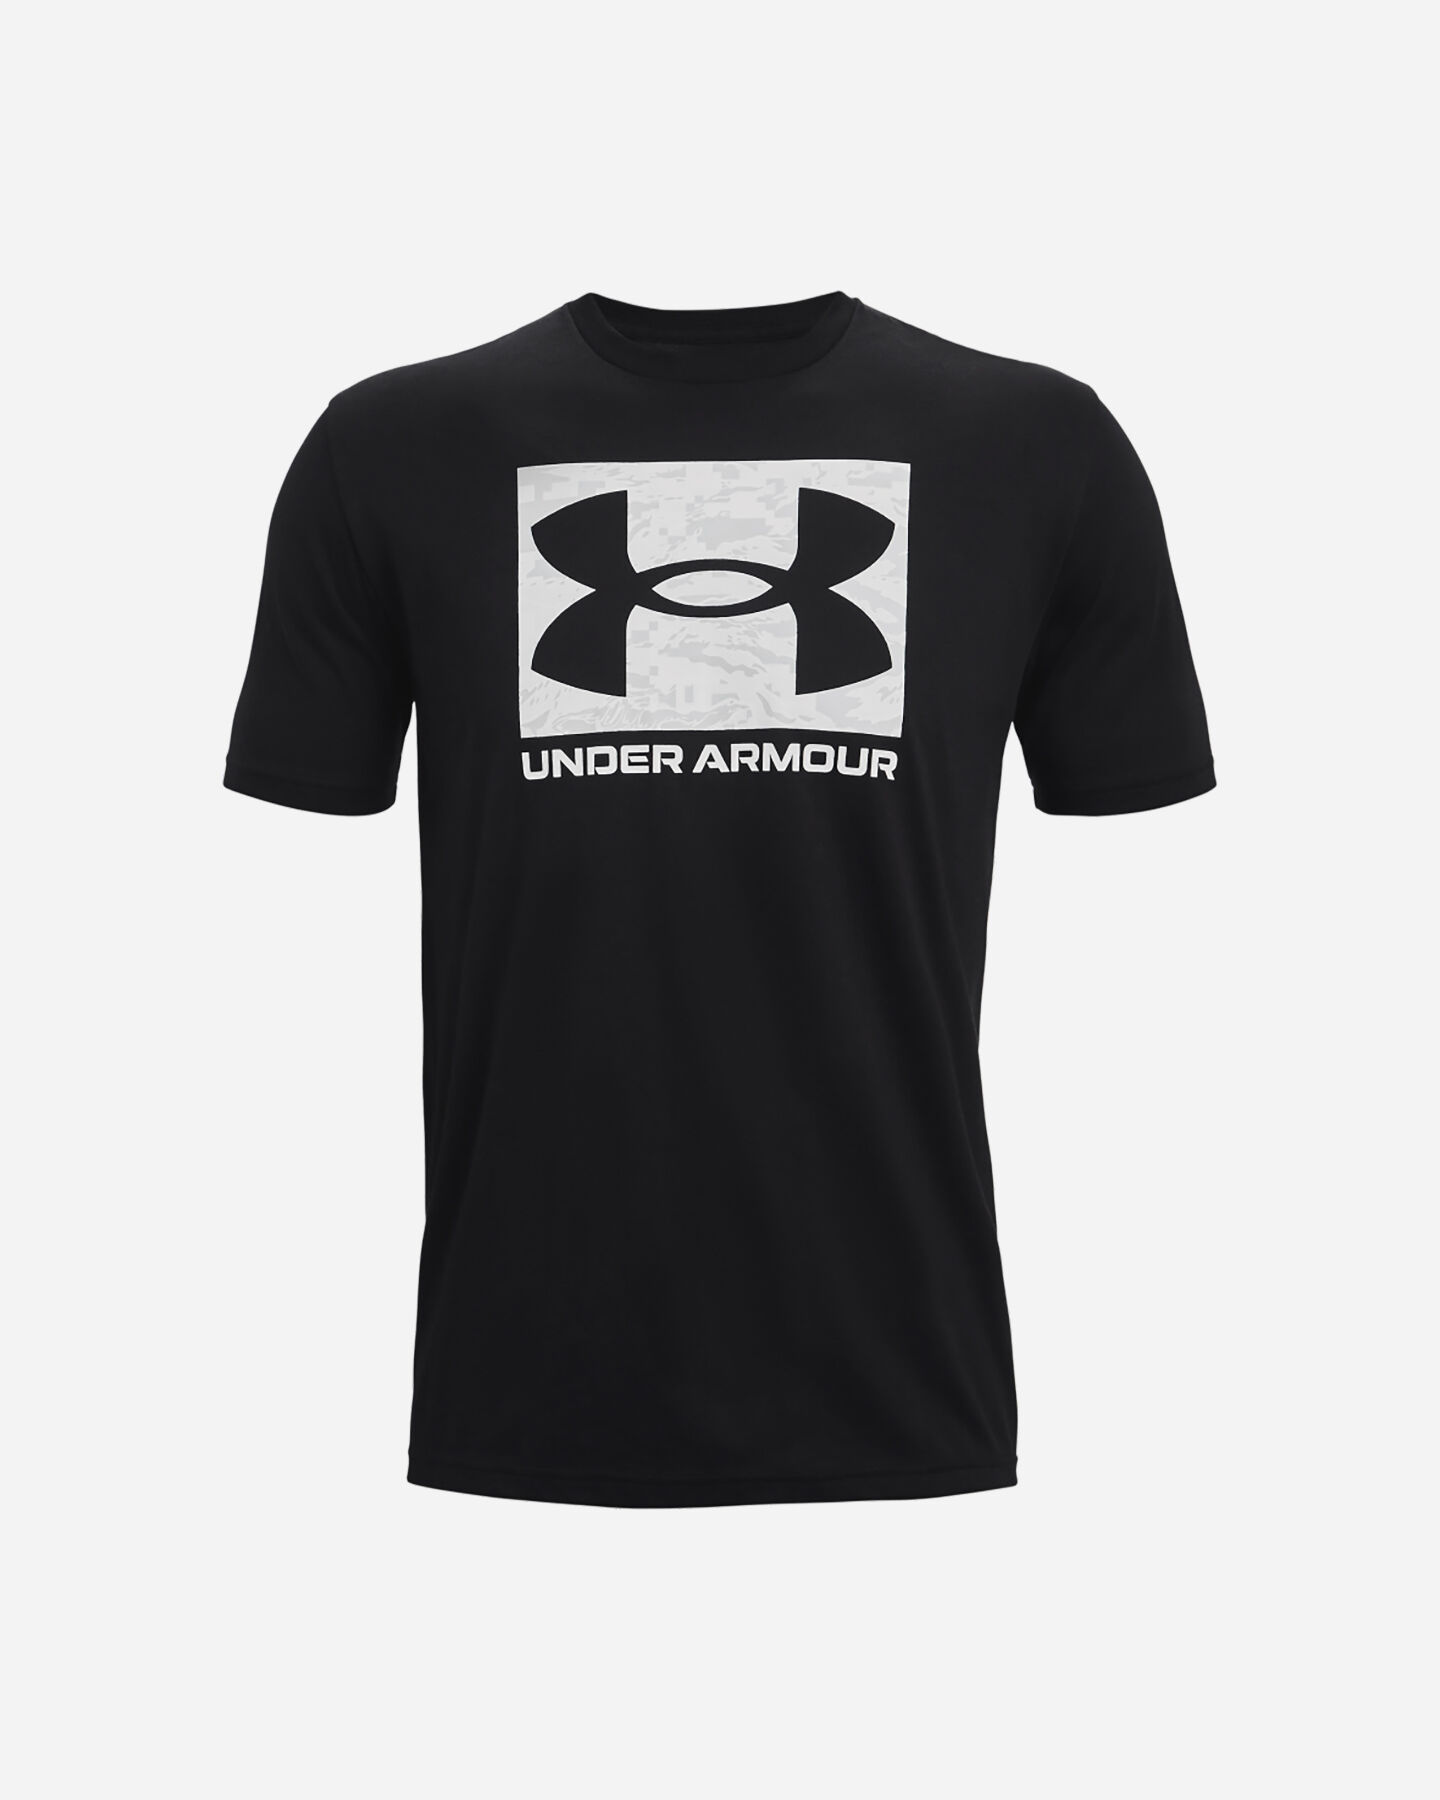  T-Shirt UNDER ARMOUR LOGO CAMO BOX M S5287404|0001|XS scatto 0